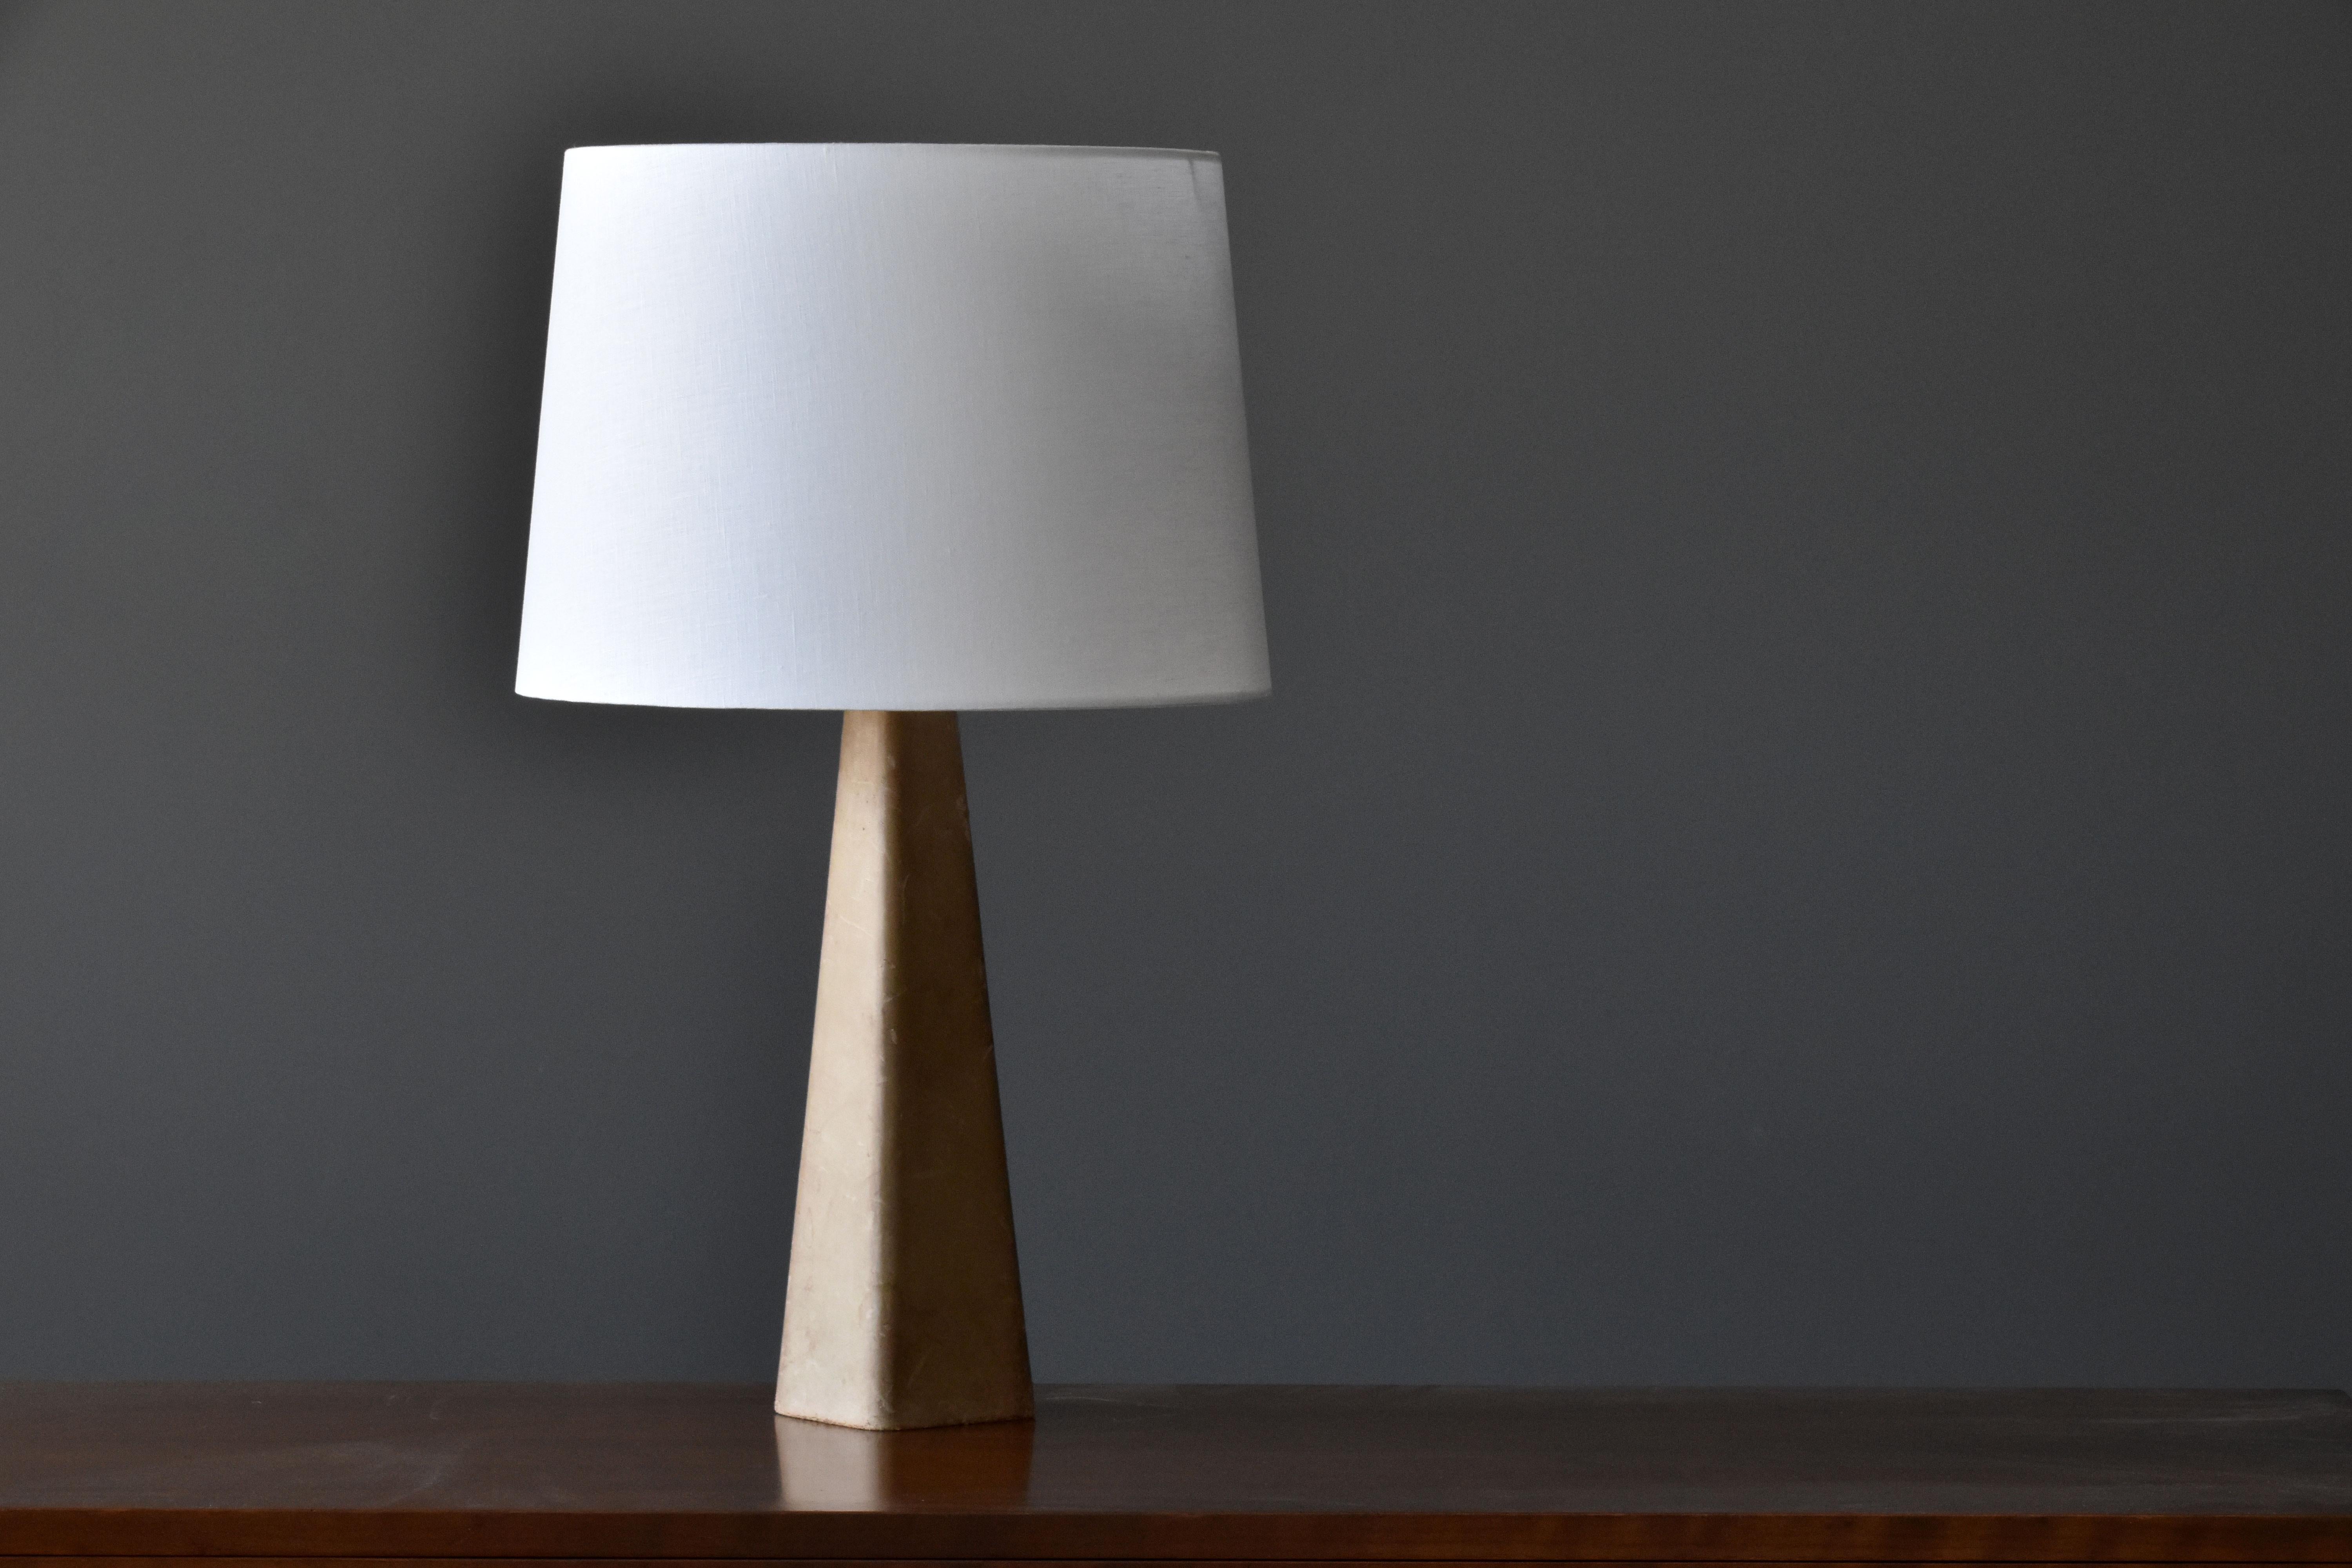 A table lamp designed by Lisa Johansson-Pape. Produced by Ornö, Finland in the 1960s. 

Made of a solid block of wood covered in leather, fitted with a brass neck and fabric screen. 

Other contemporary Scandinavian lighting designers include